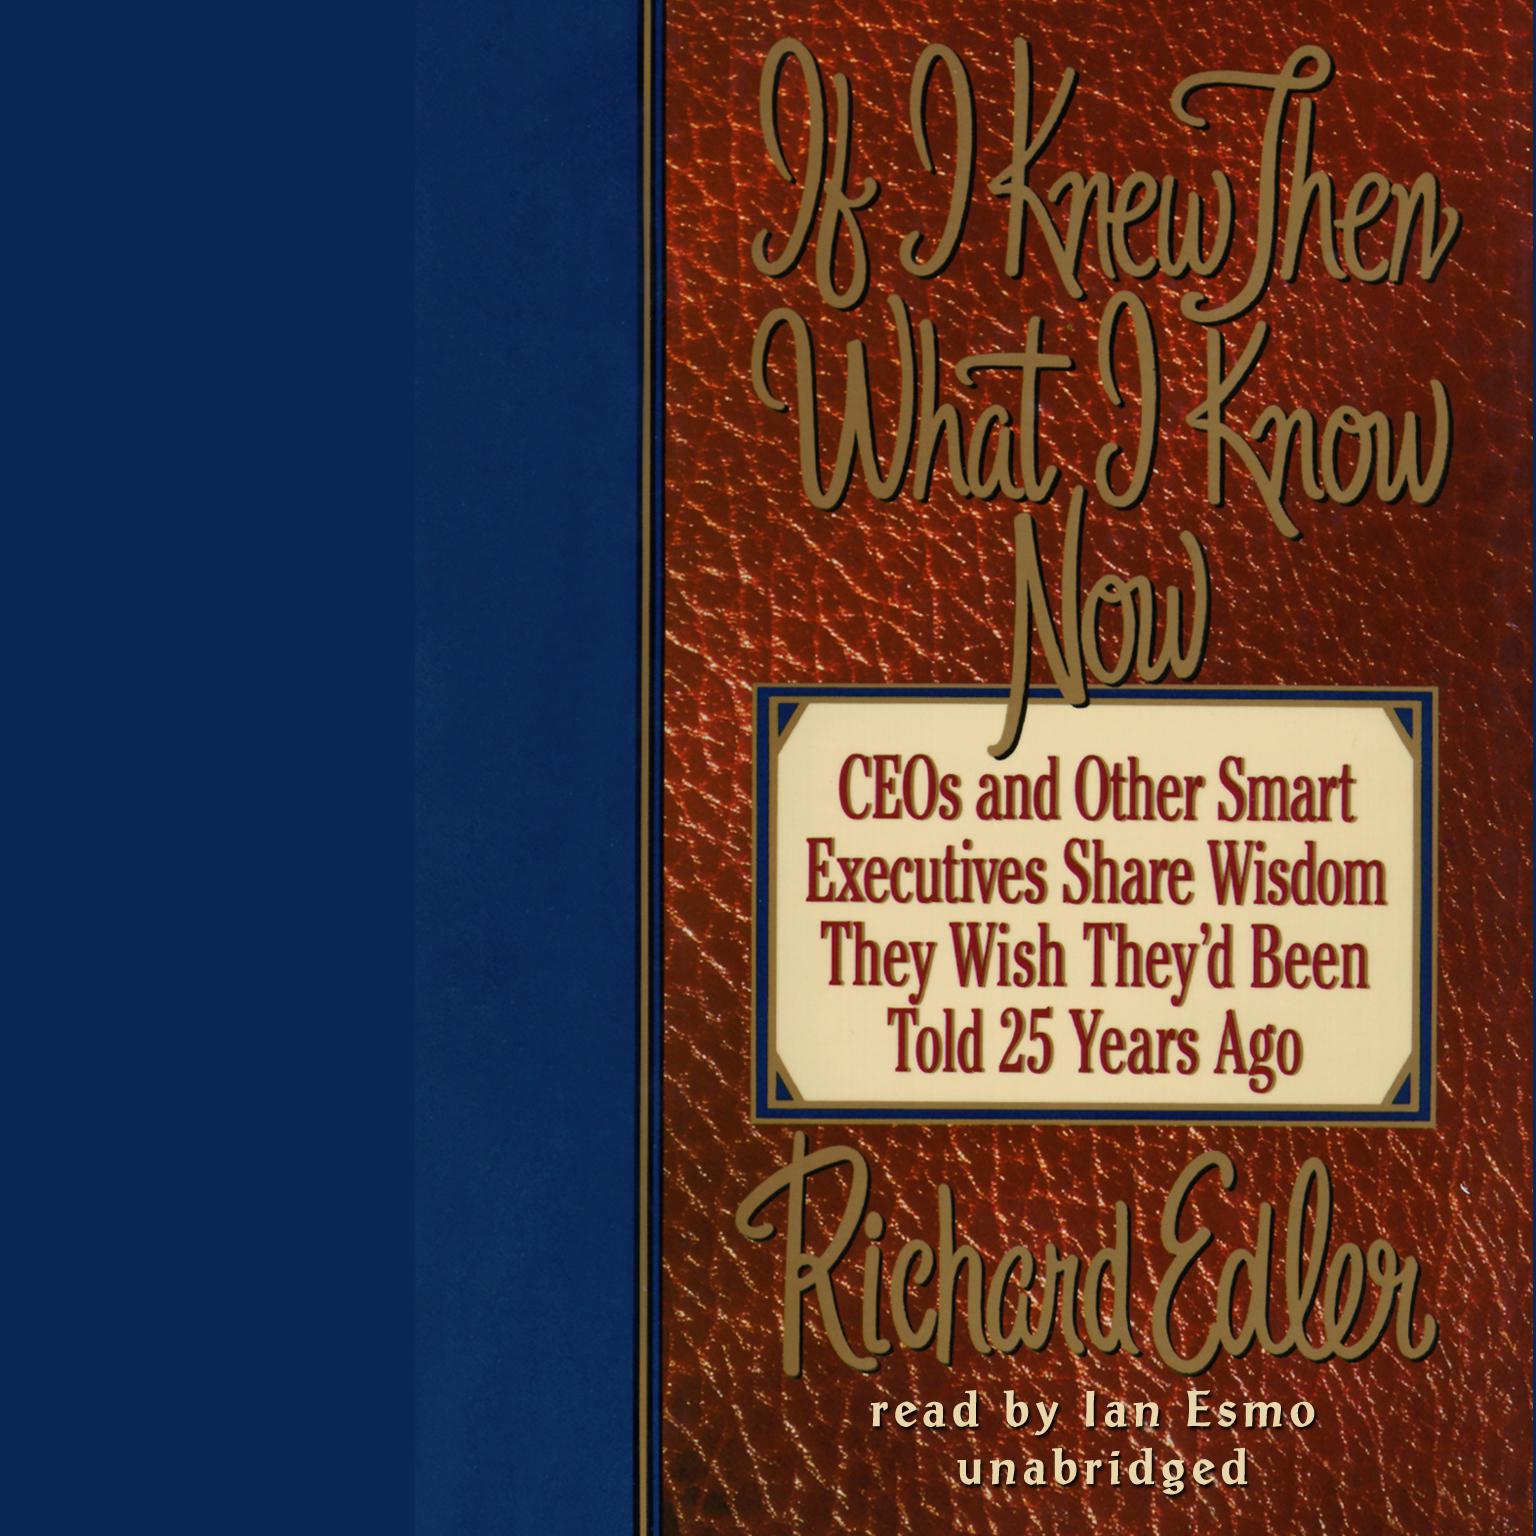 If I Knew Then What I Know Now: CEOs and Other Smart Executives Share Wisdom They Wish Theyd Been Told 25 Years Ago Audiobook, by Richard Edler